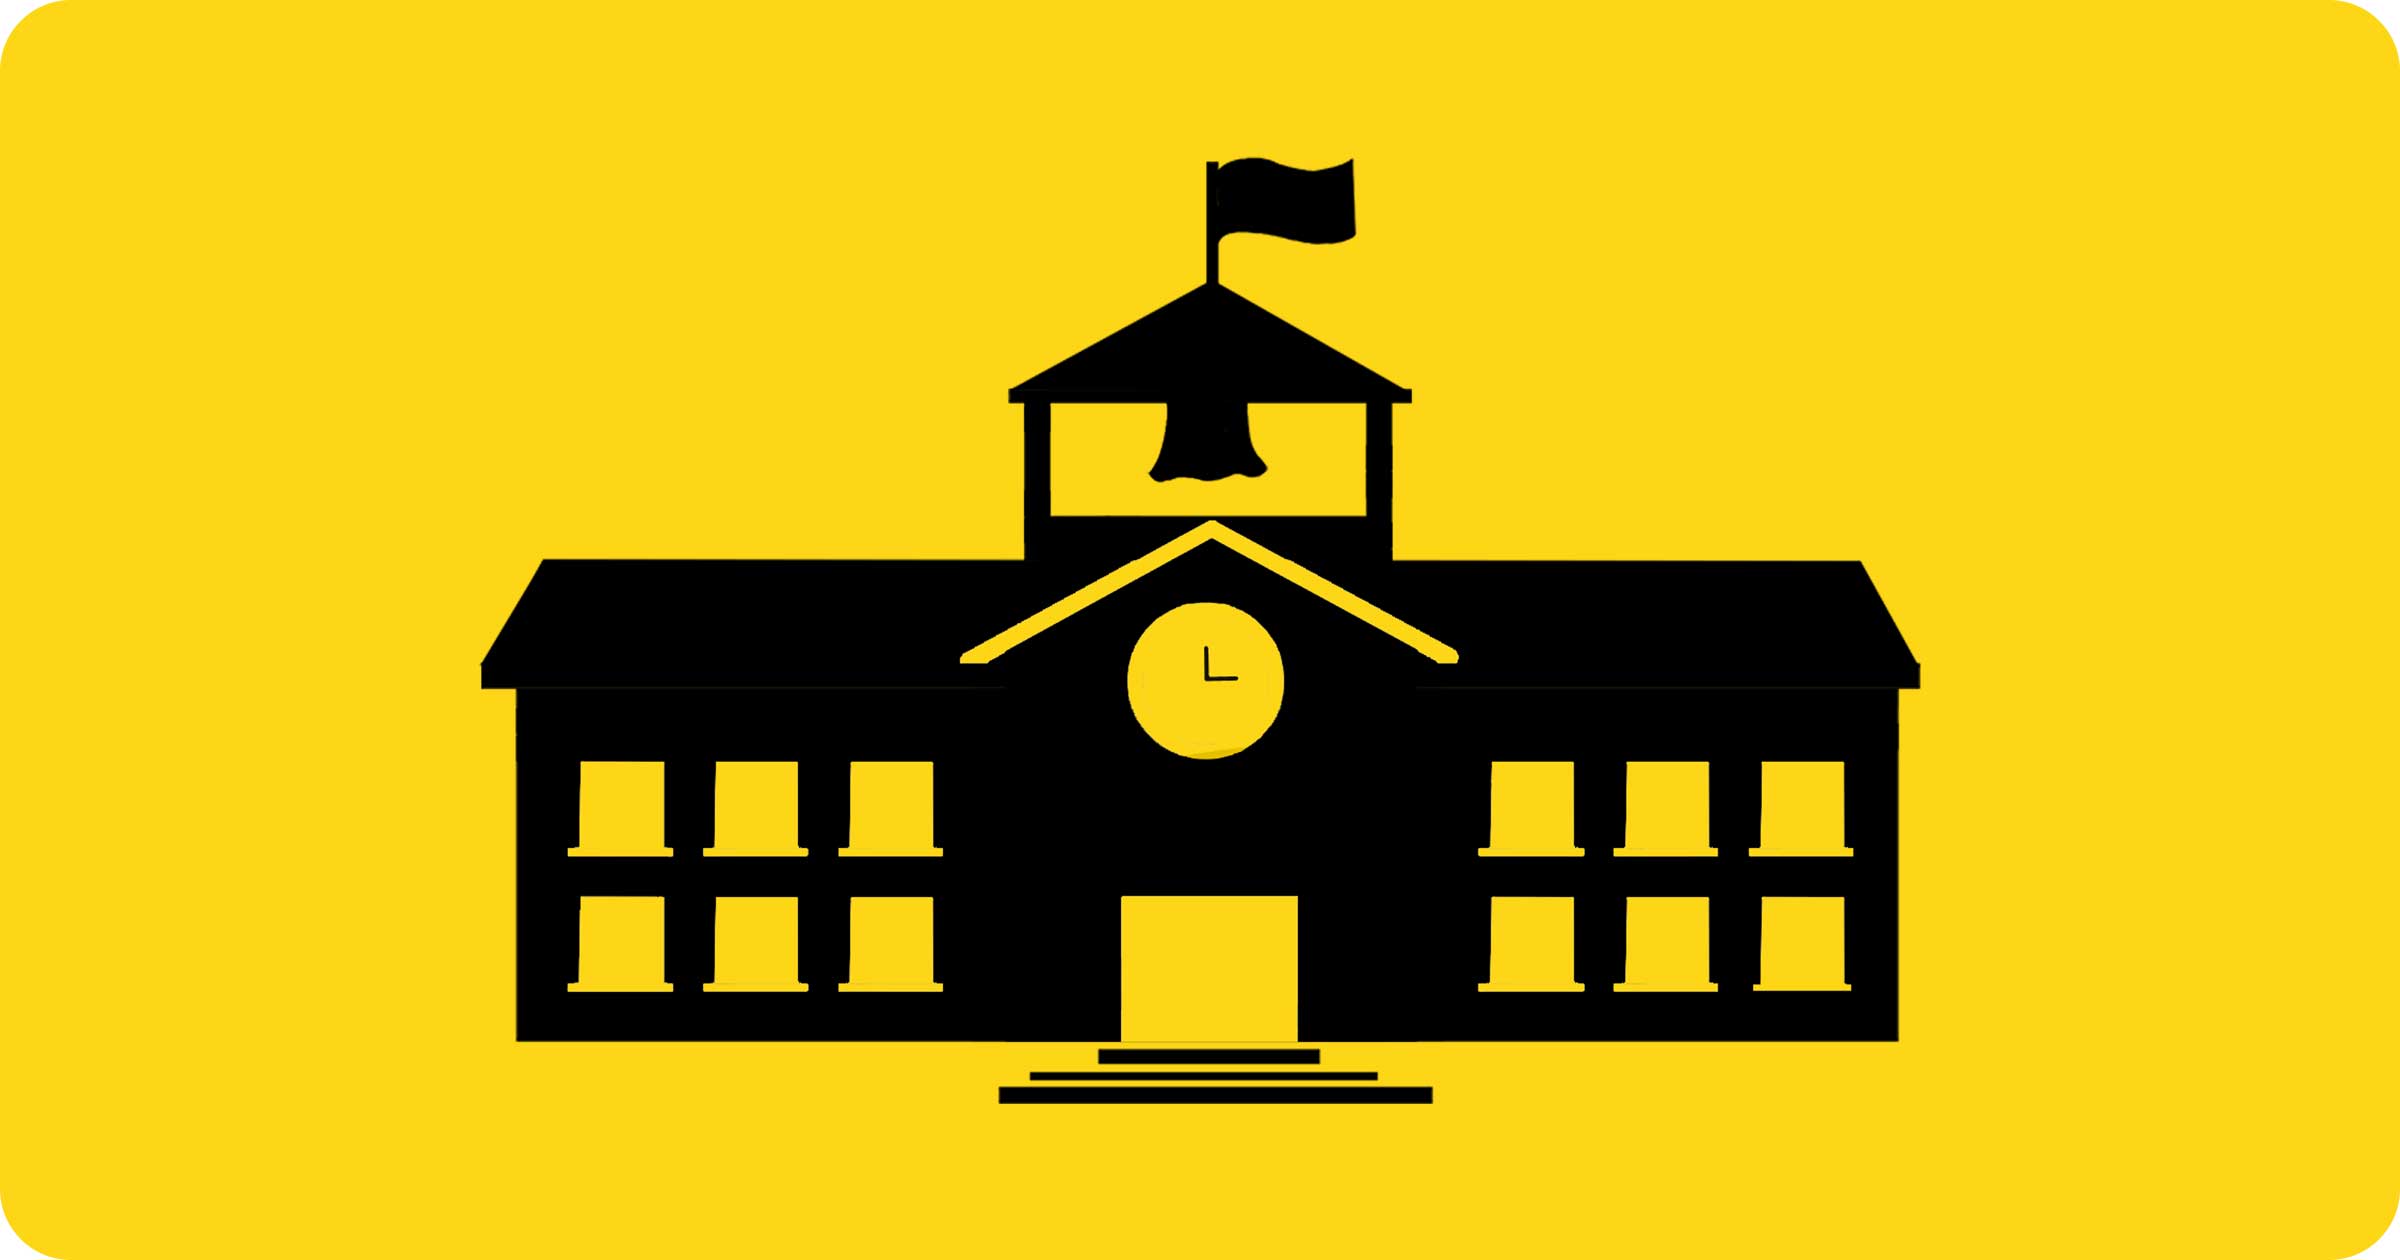 Yellow background with a black outline of school